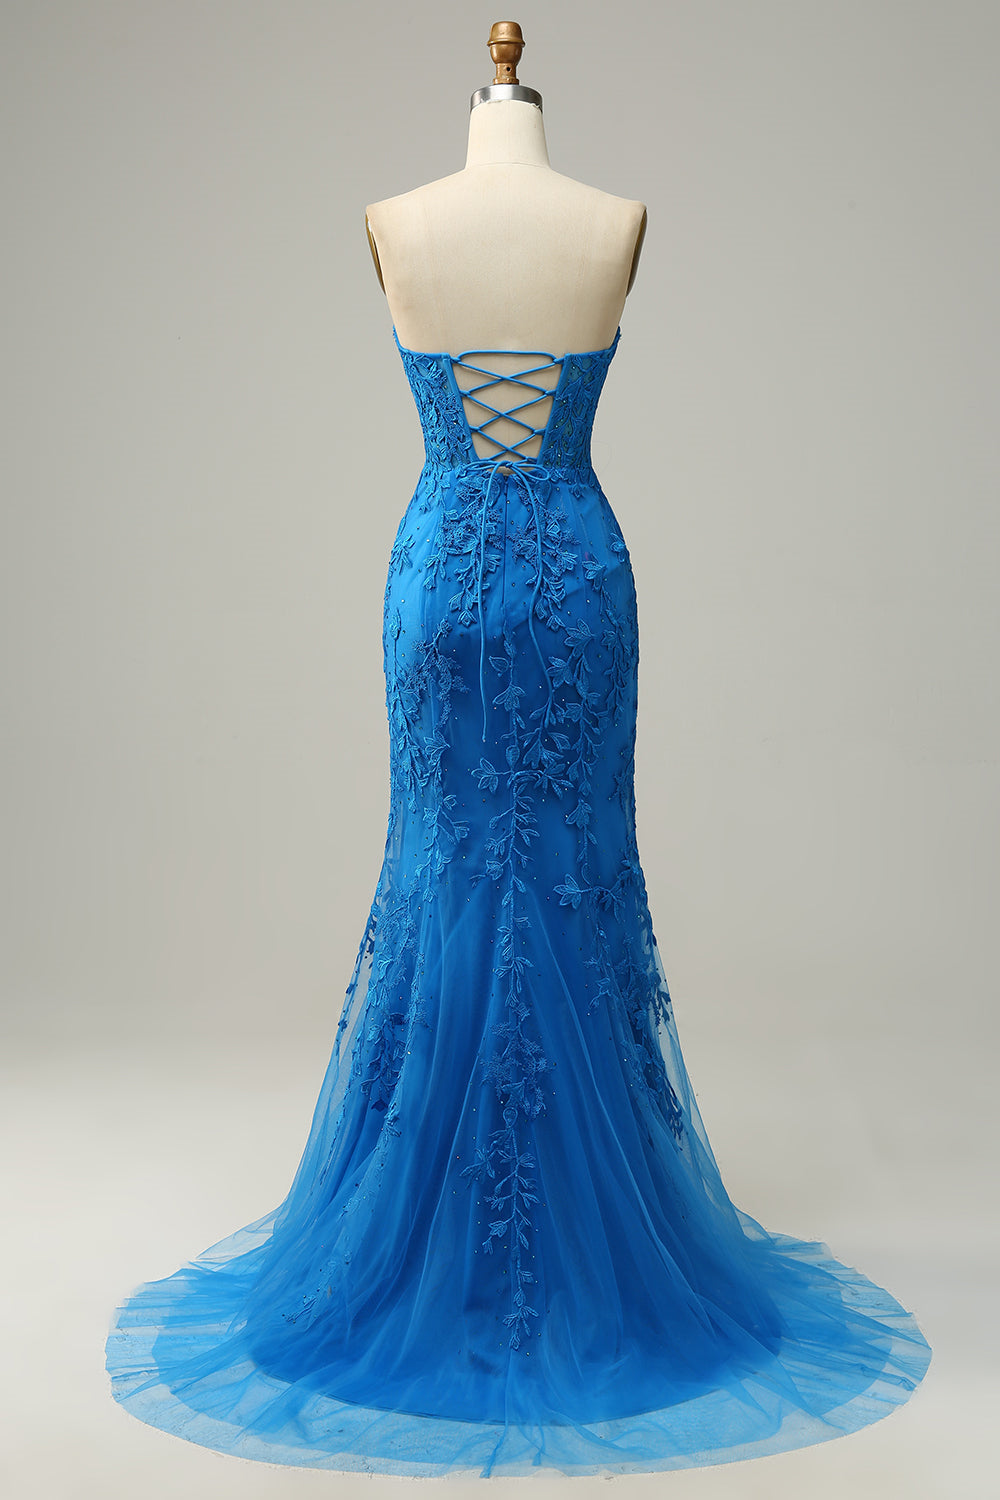 Blue Mermaid Strapless Lace-Up Tulle Applique Long Prom Dress